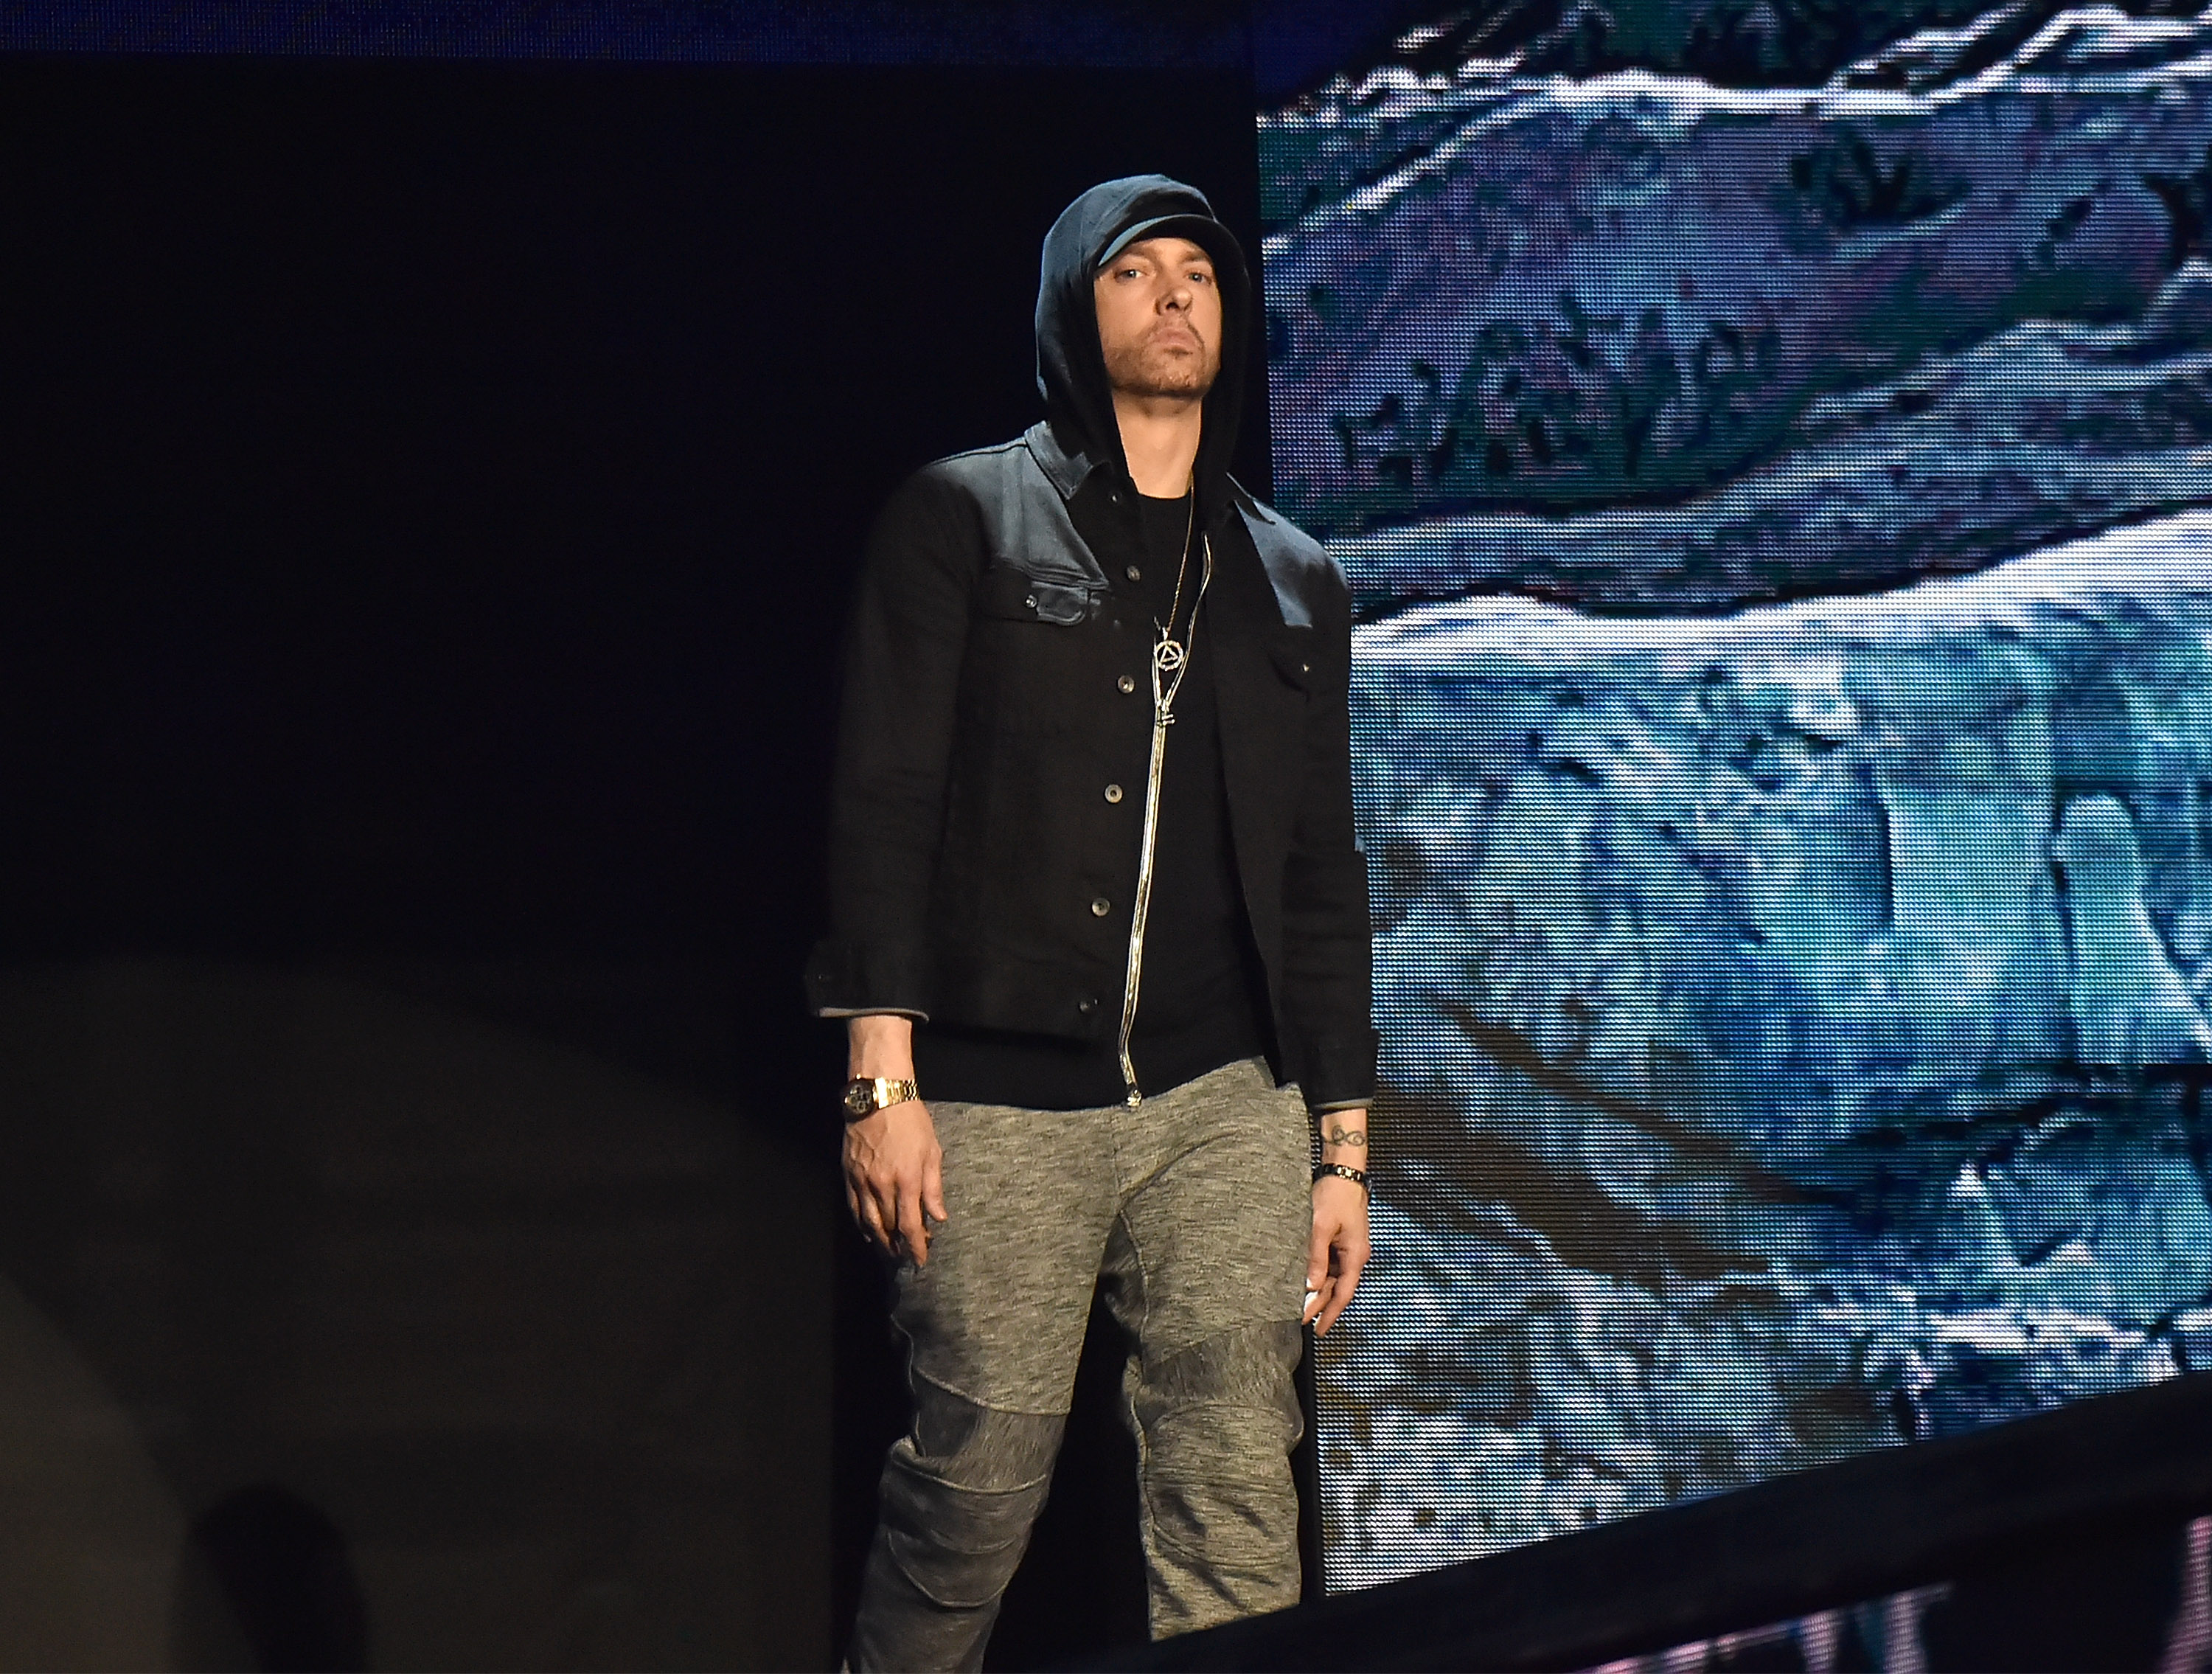 Eminem performs on stage during the MTV EMAs 2017 held at The SSE Arena, Wembley on November 12, 2017, in London, England. | Source: Getty Images